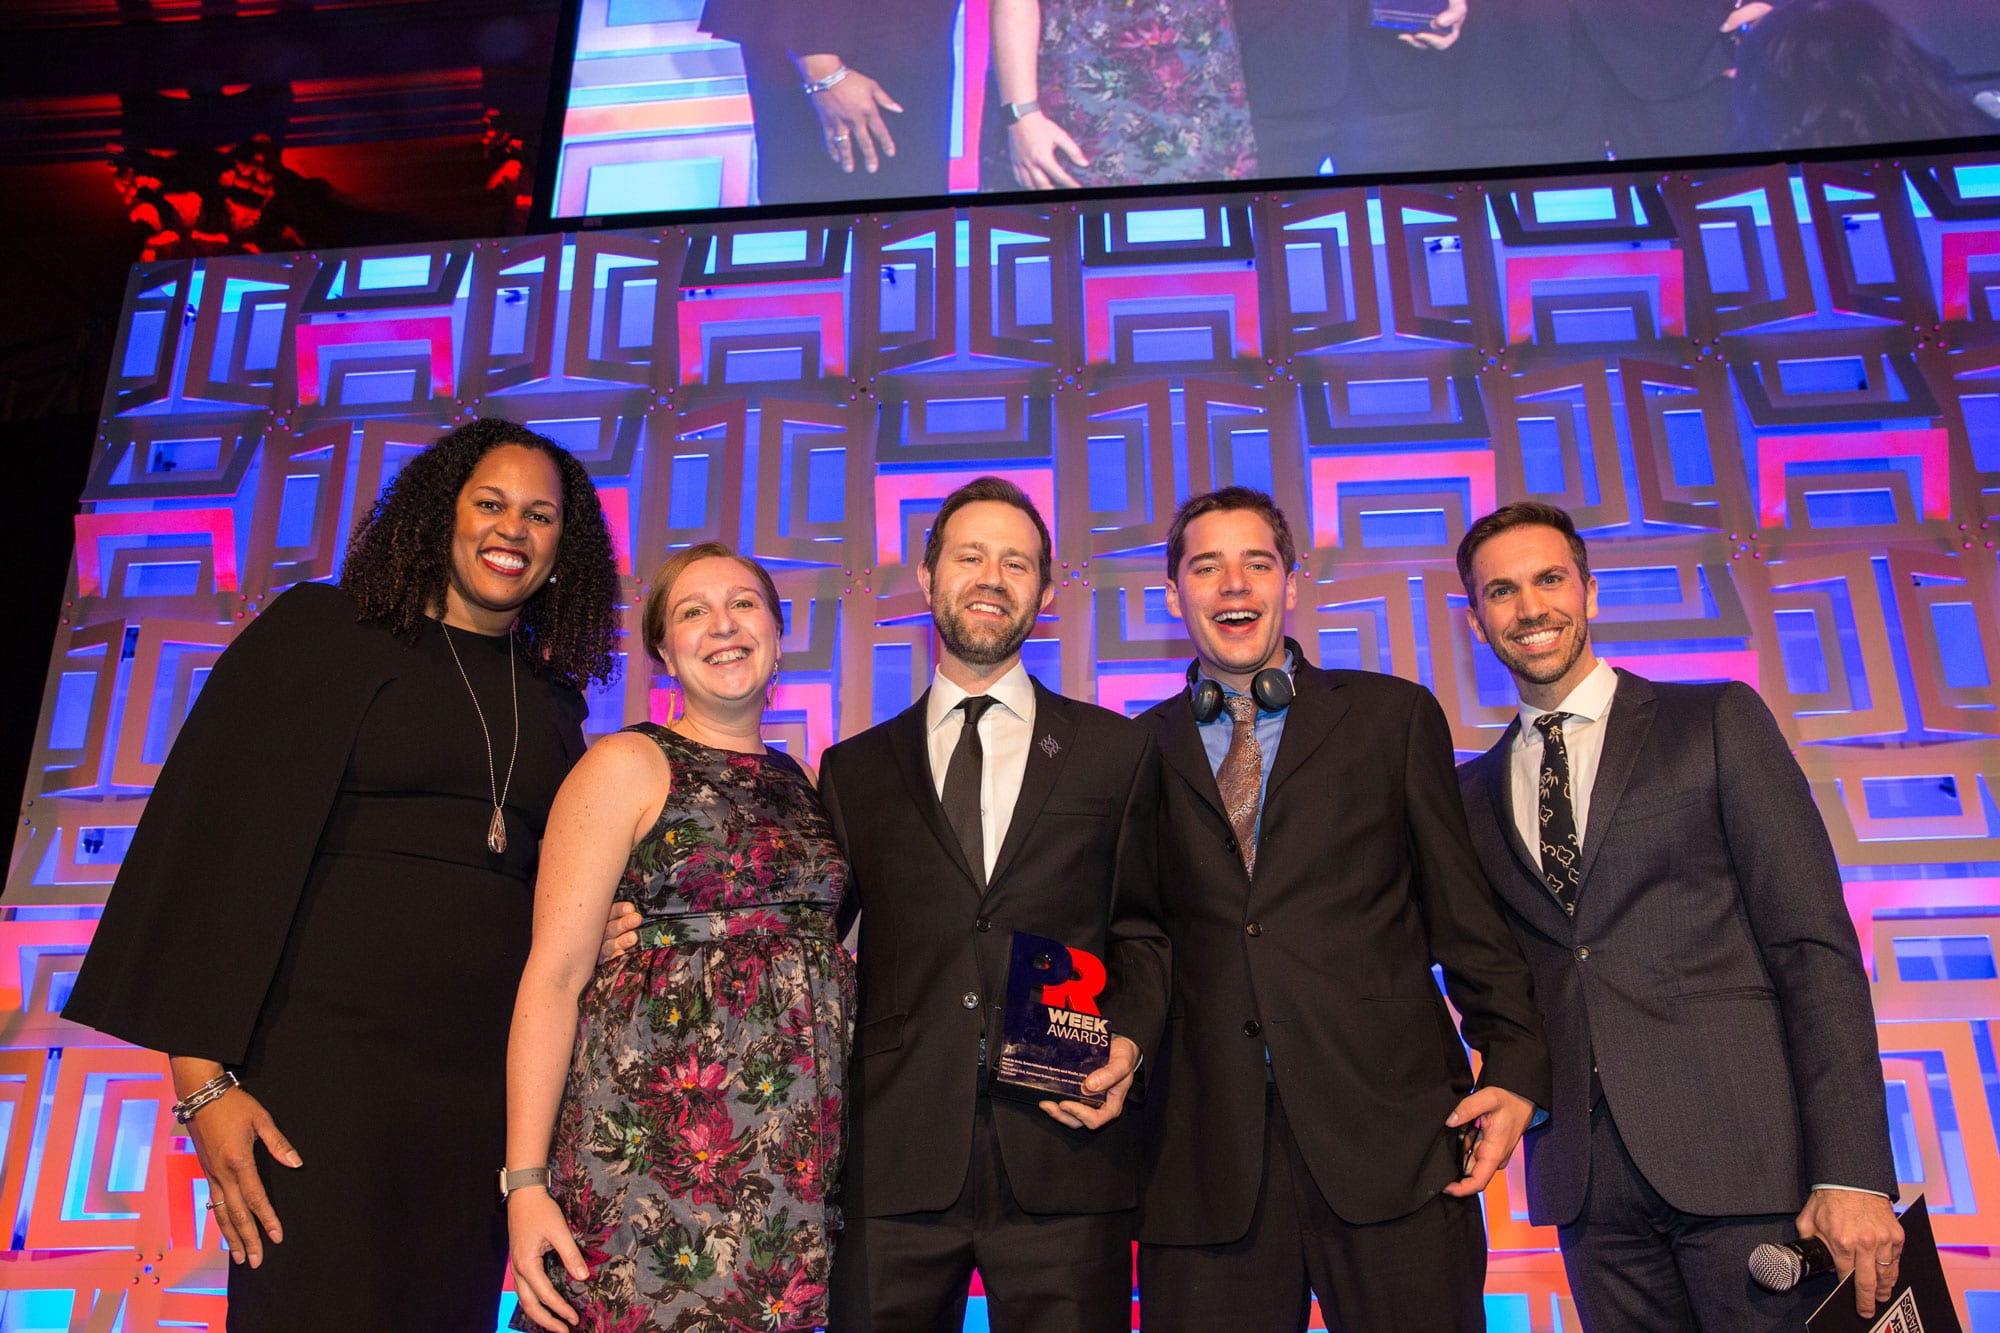 Adam Ritchie Brand Direction Wins Two Top Honors in Recent PR Awards